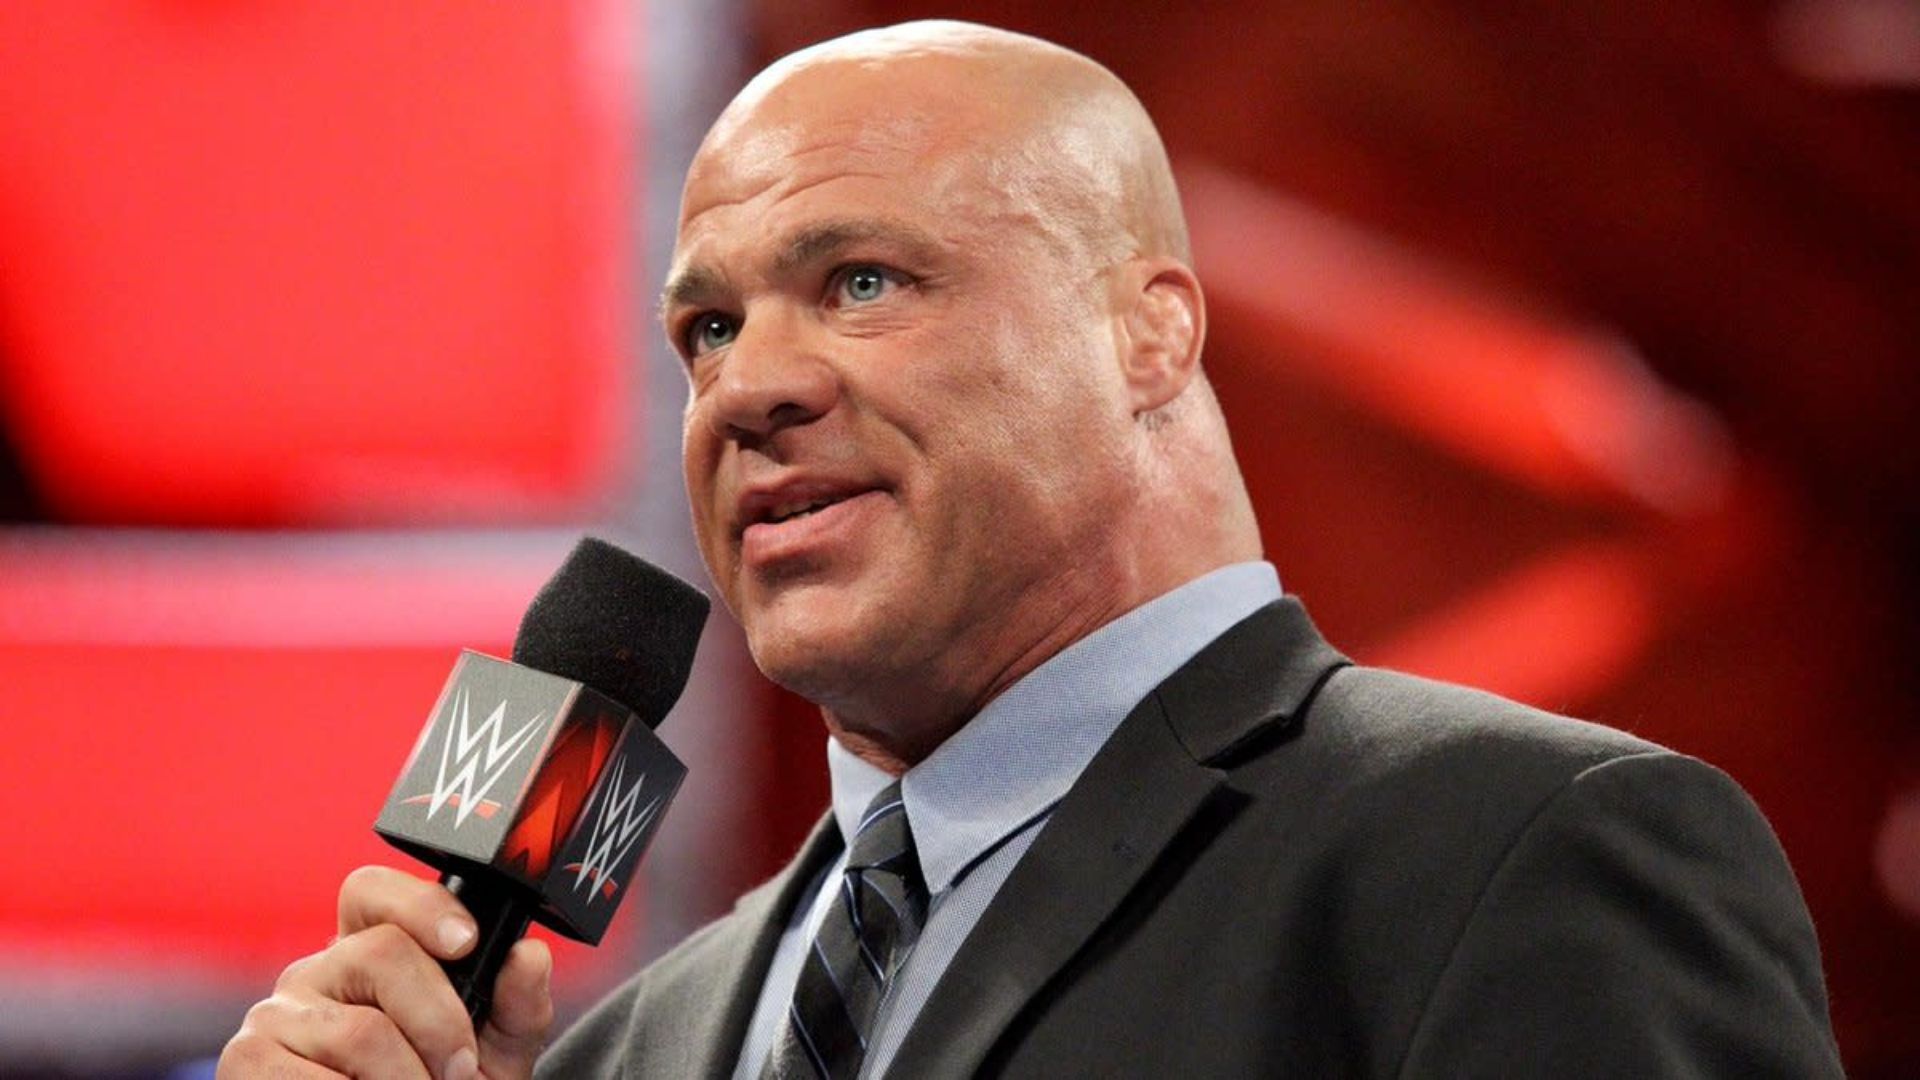 Kurt Angle has served as a mentor to many young WWE Superstars.